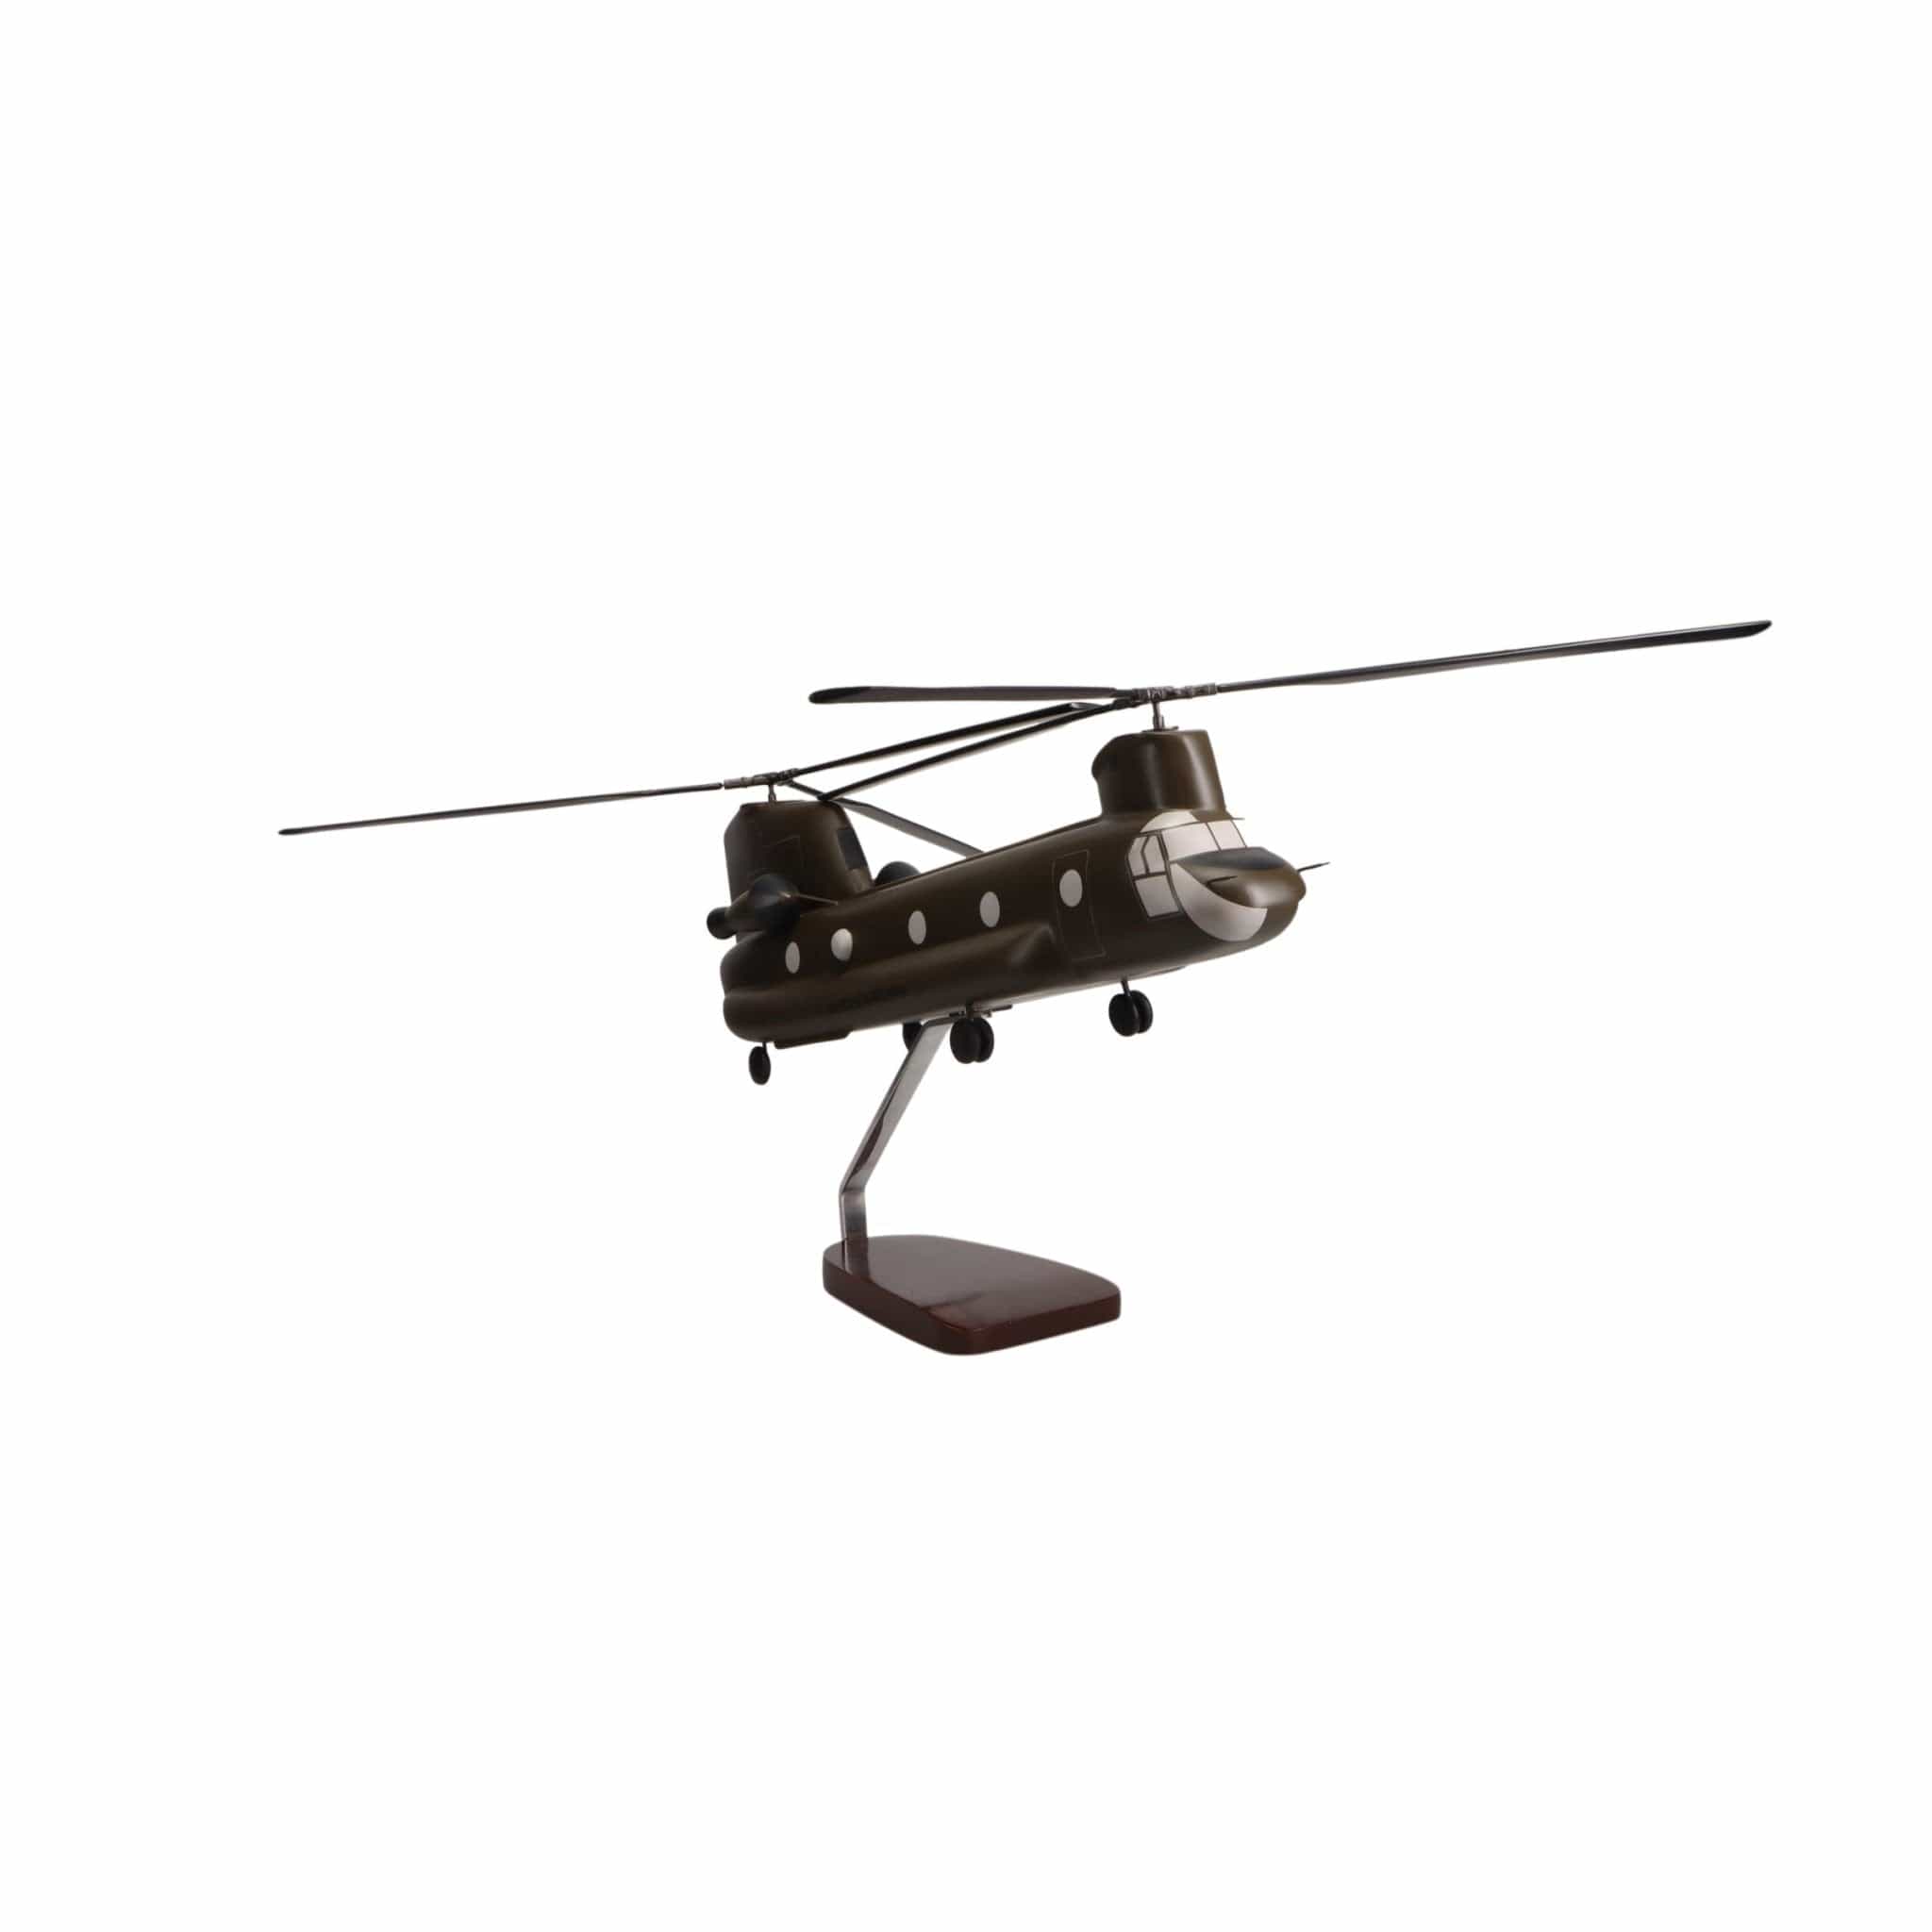 Boeing™ CH-47D Chinook Large Mahogany Model